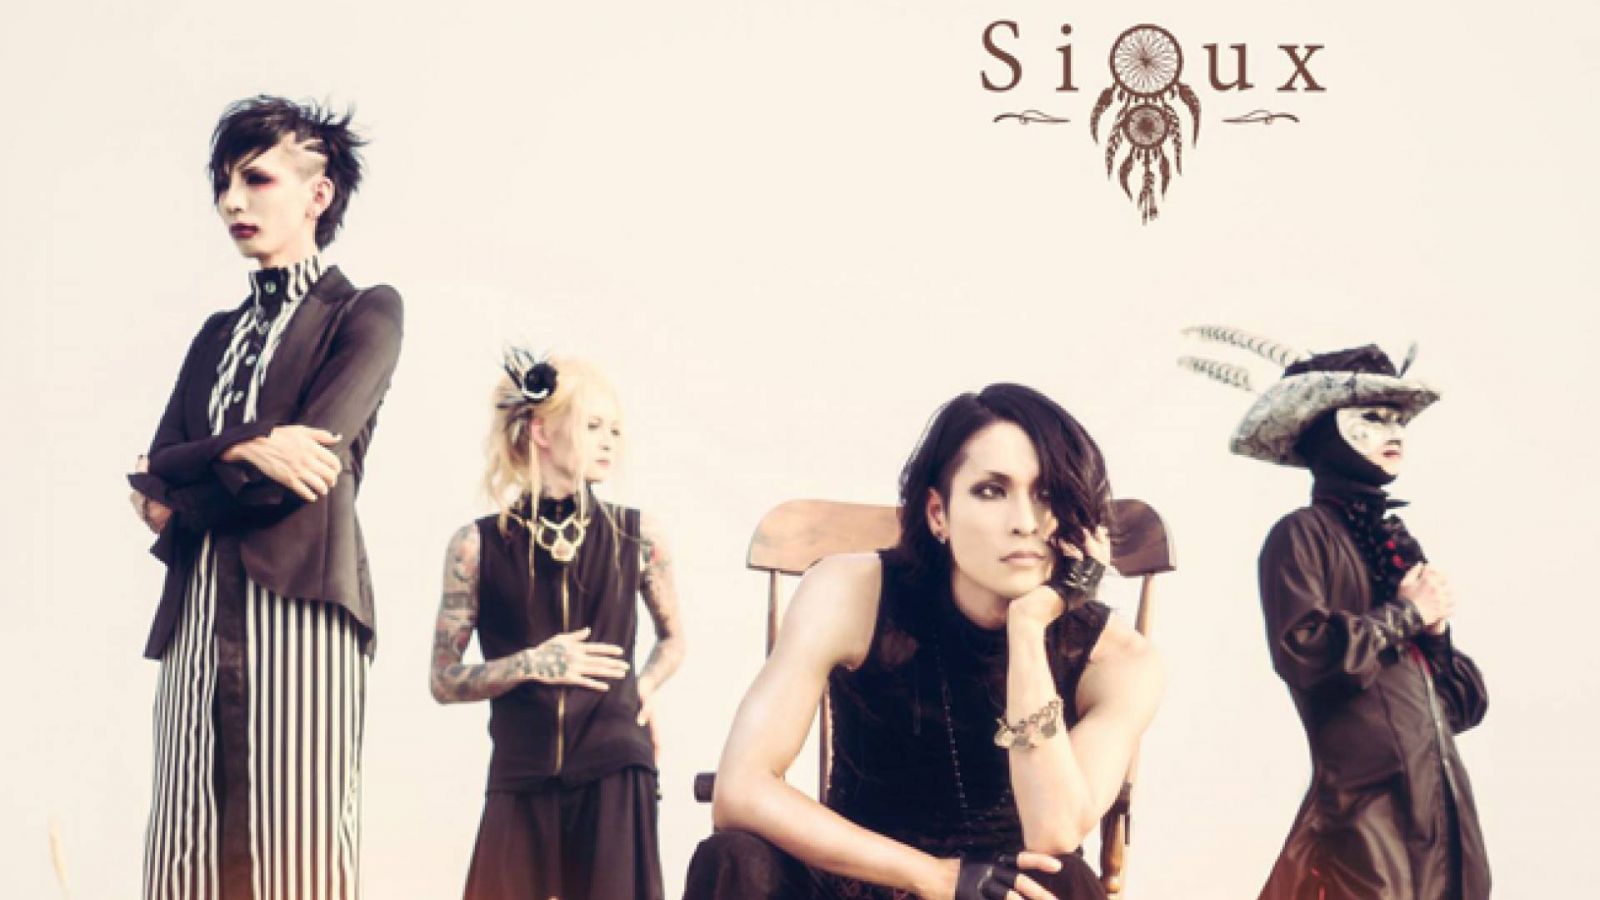 Новый сингл Sioux © Sioux. All rights reserved.